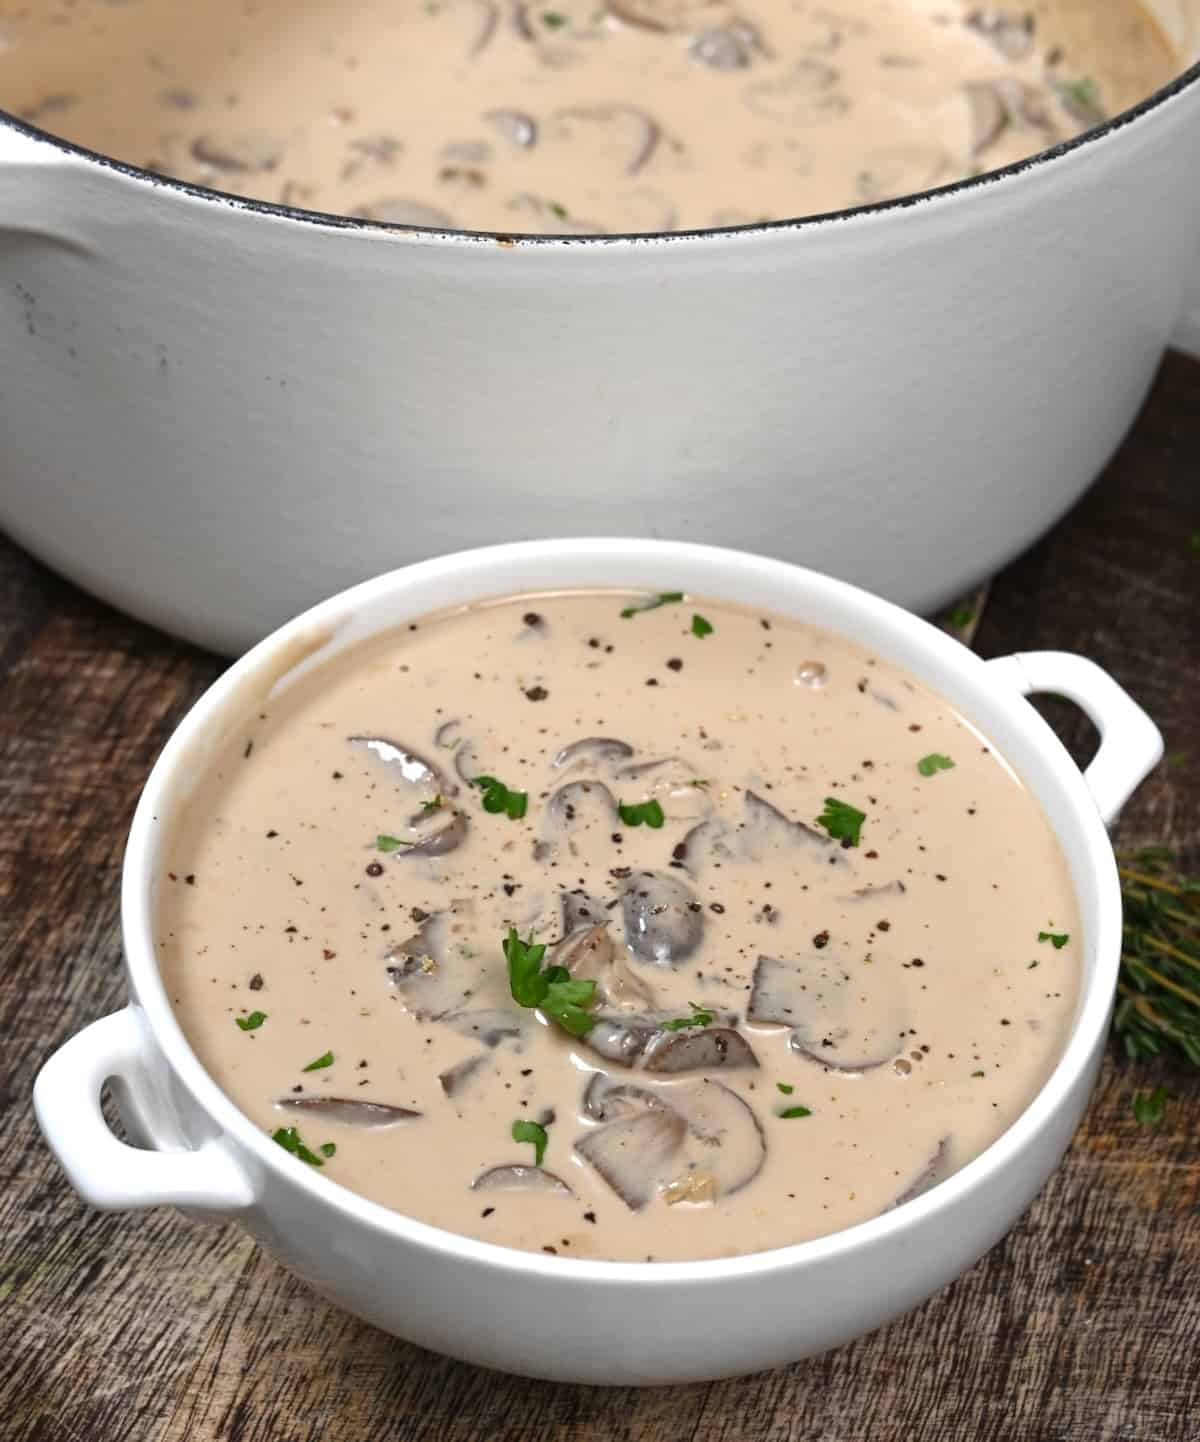 A serving of mushroom soup topped with parsley